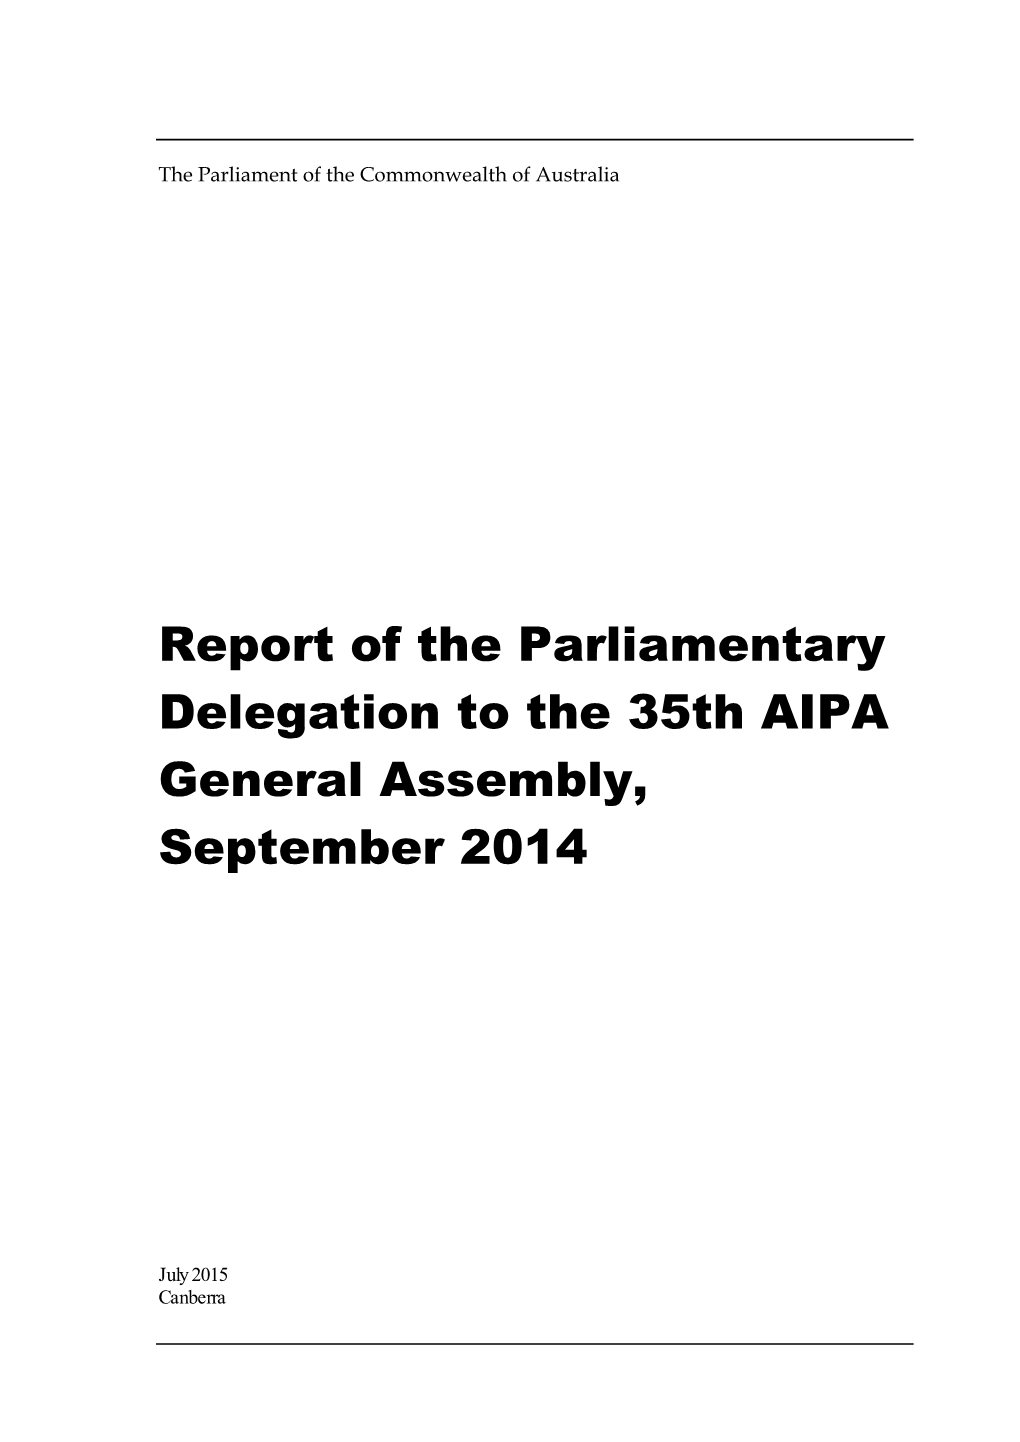 Report of the Parliamentary Delegation to the 35Th AIPA General Assembly, September 2014